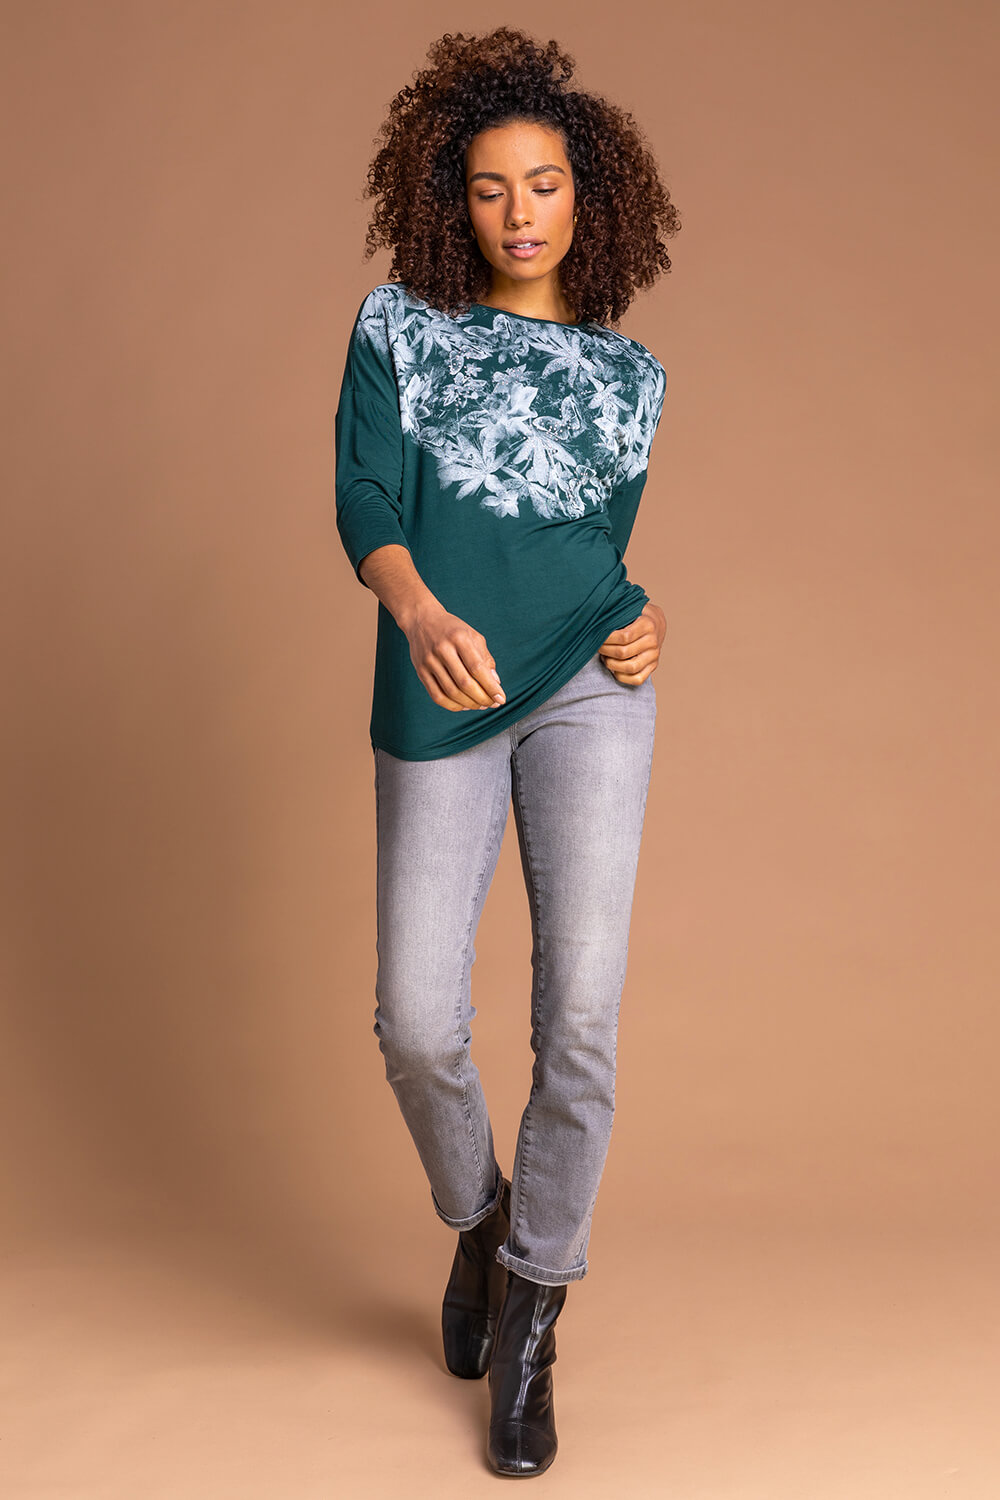 Emerald Floral Butterfly Print Top, Image 4 of 5